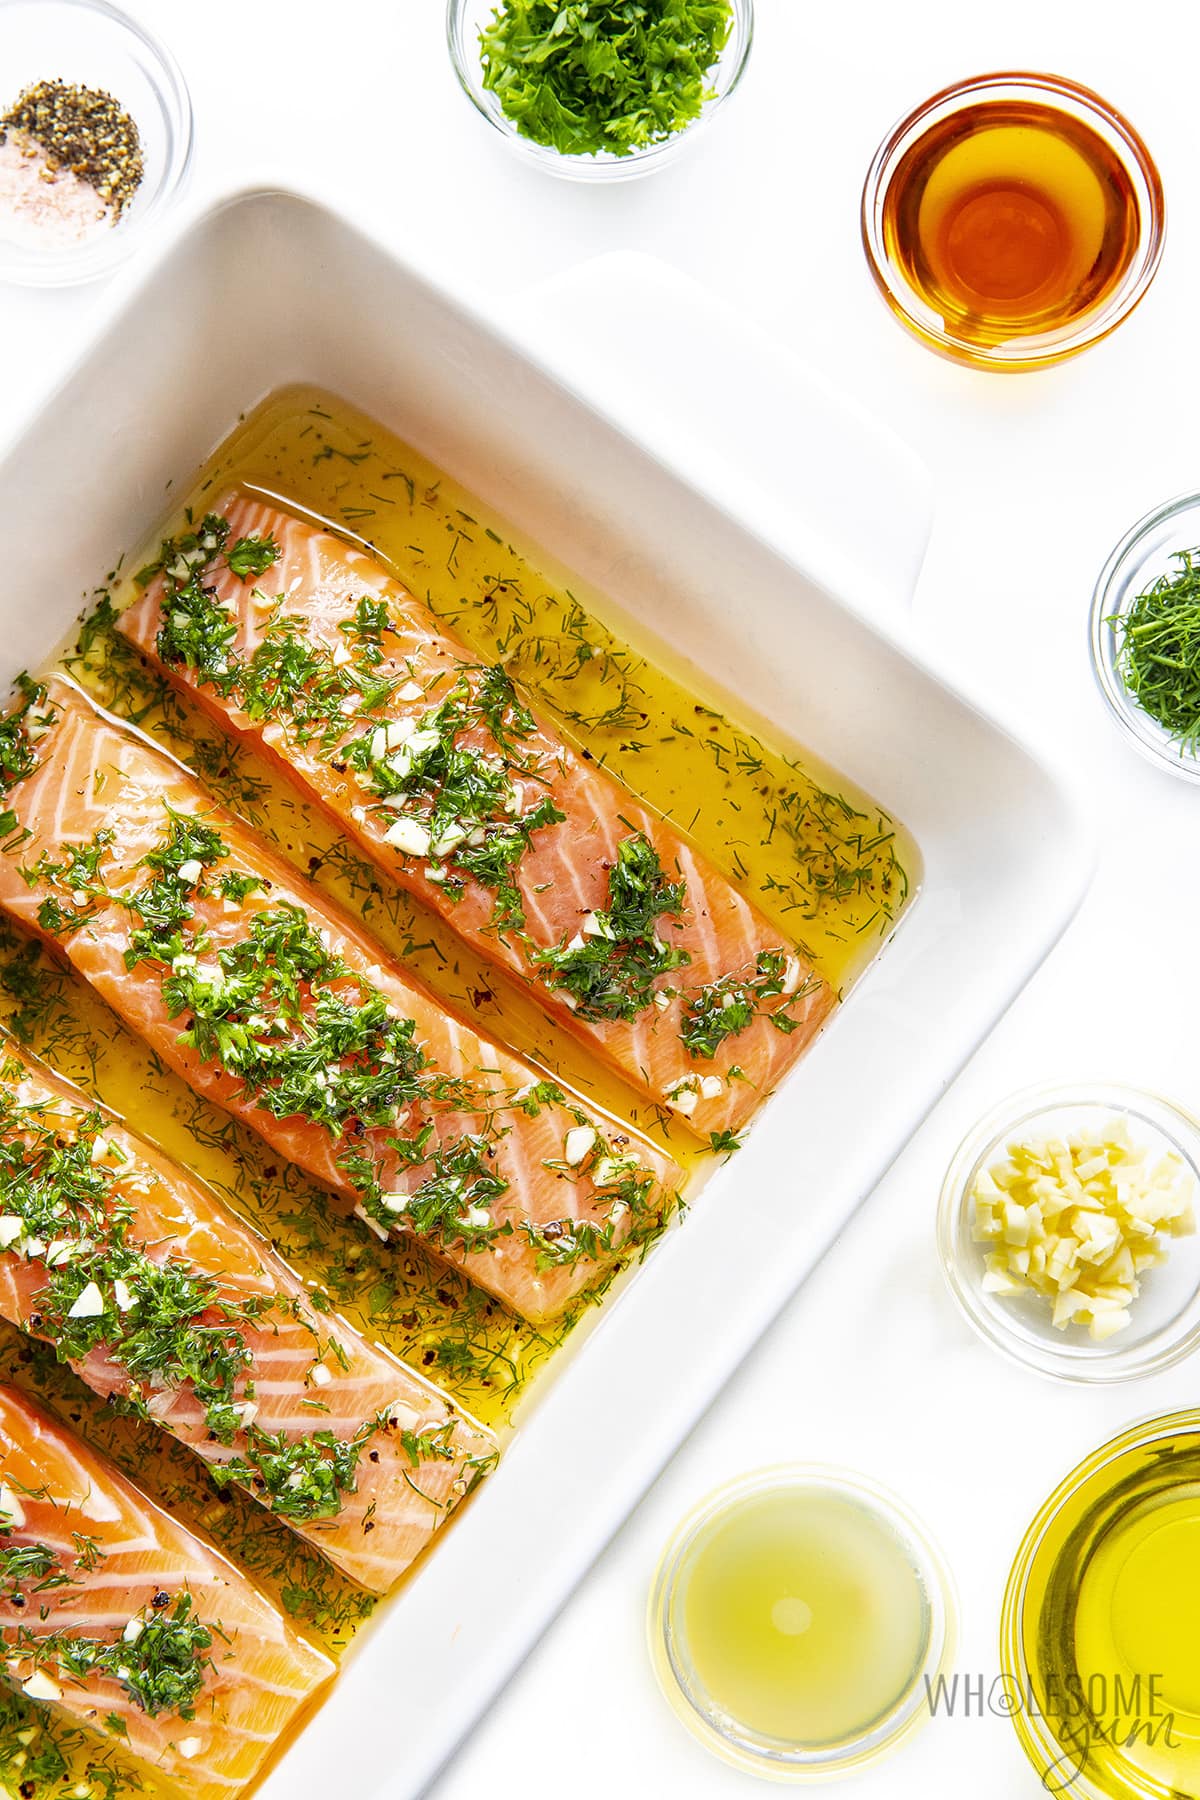 Salmon marinade recipe with fillets in baking dish.